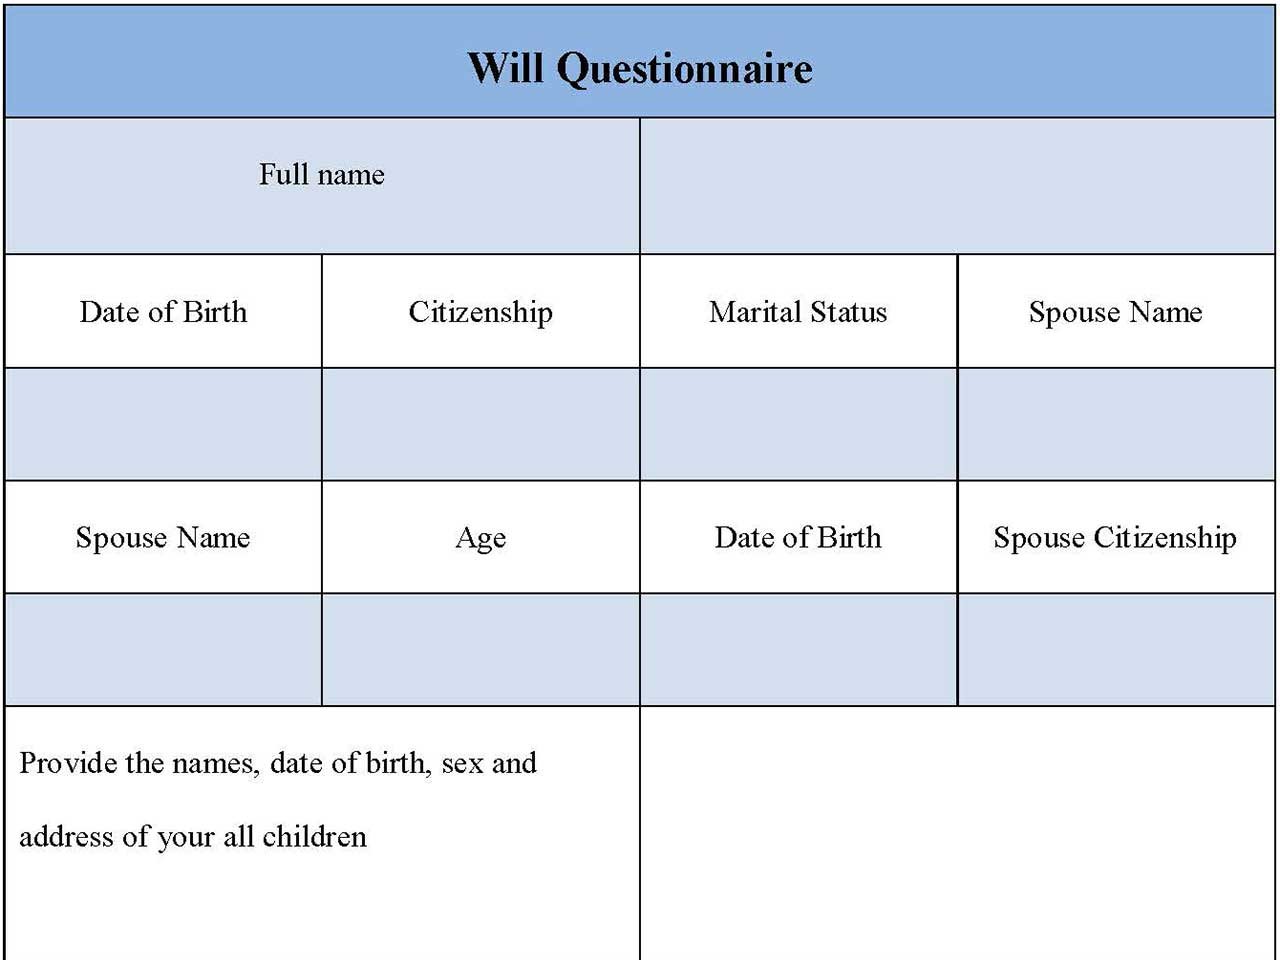 Will Questionnaire Form